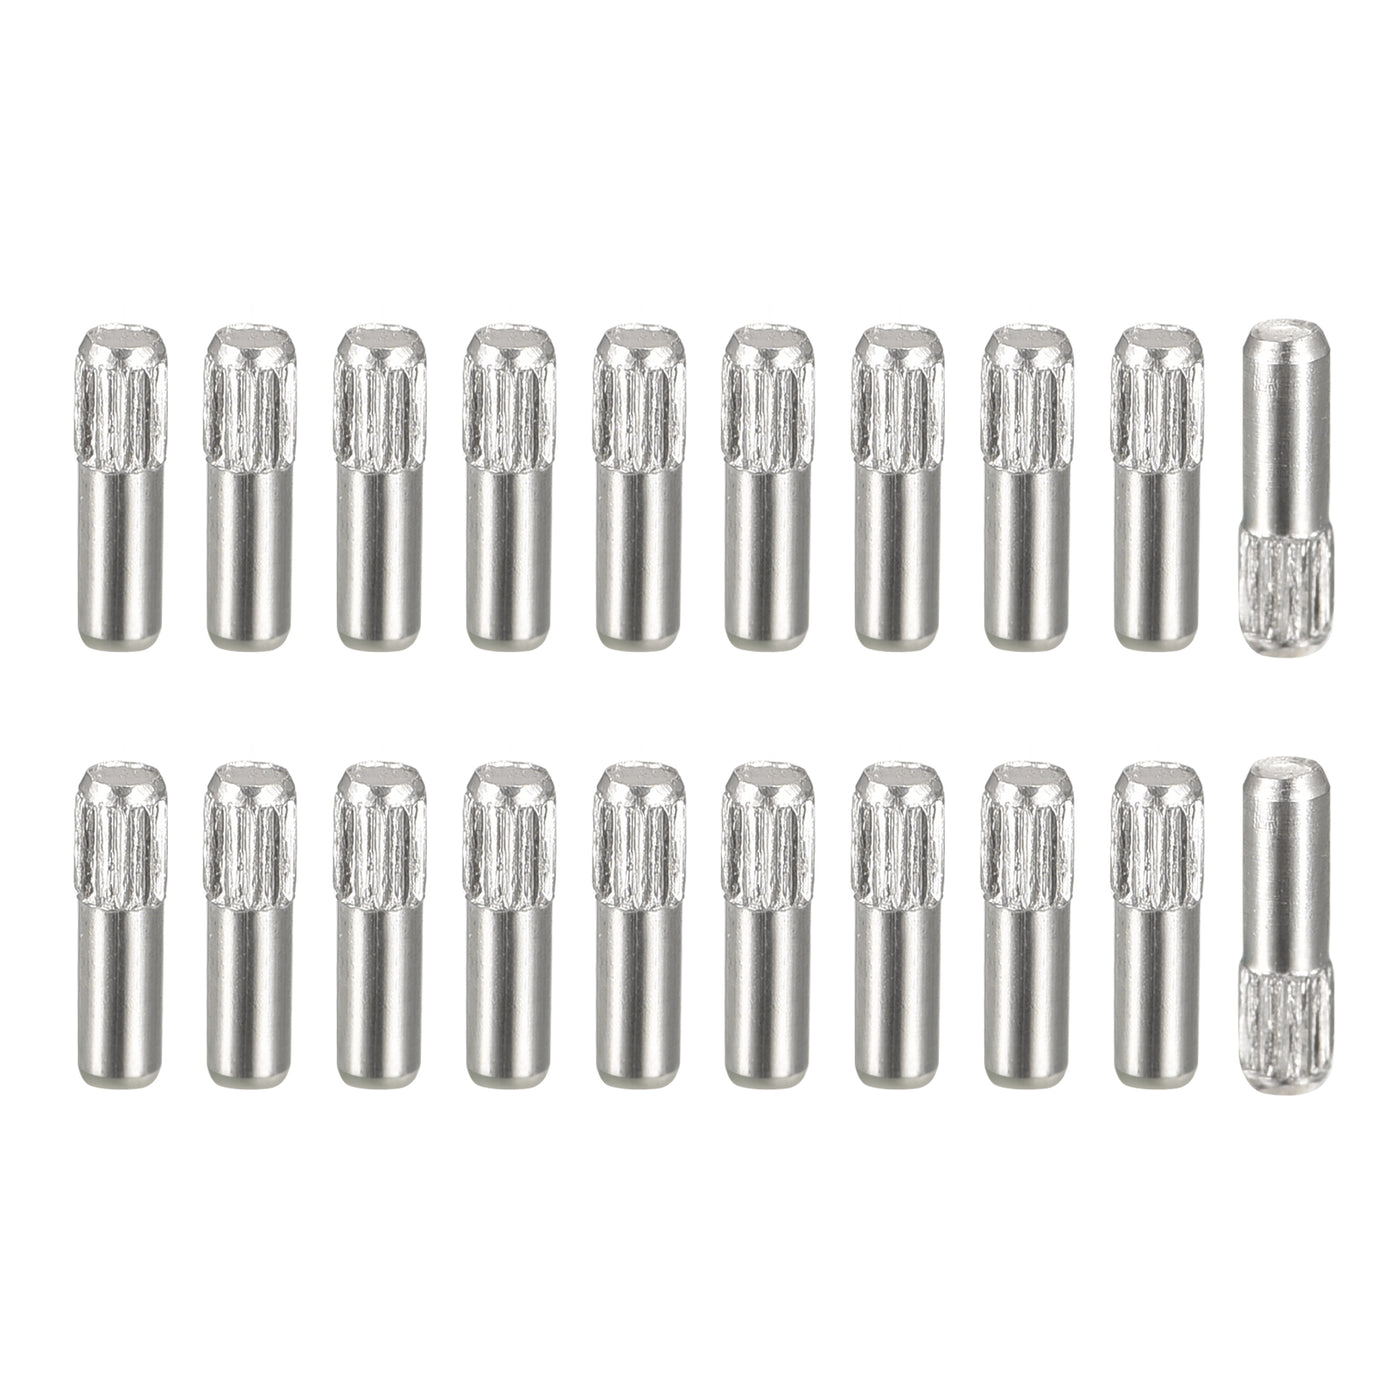 uxcell Uxcell 2x6mm 304 Stainless Steel Dowel Pins, 20Pcs Knurled Head Flat End Dowel Pin